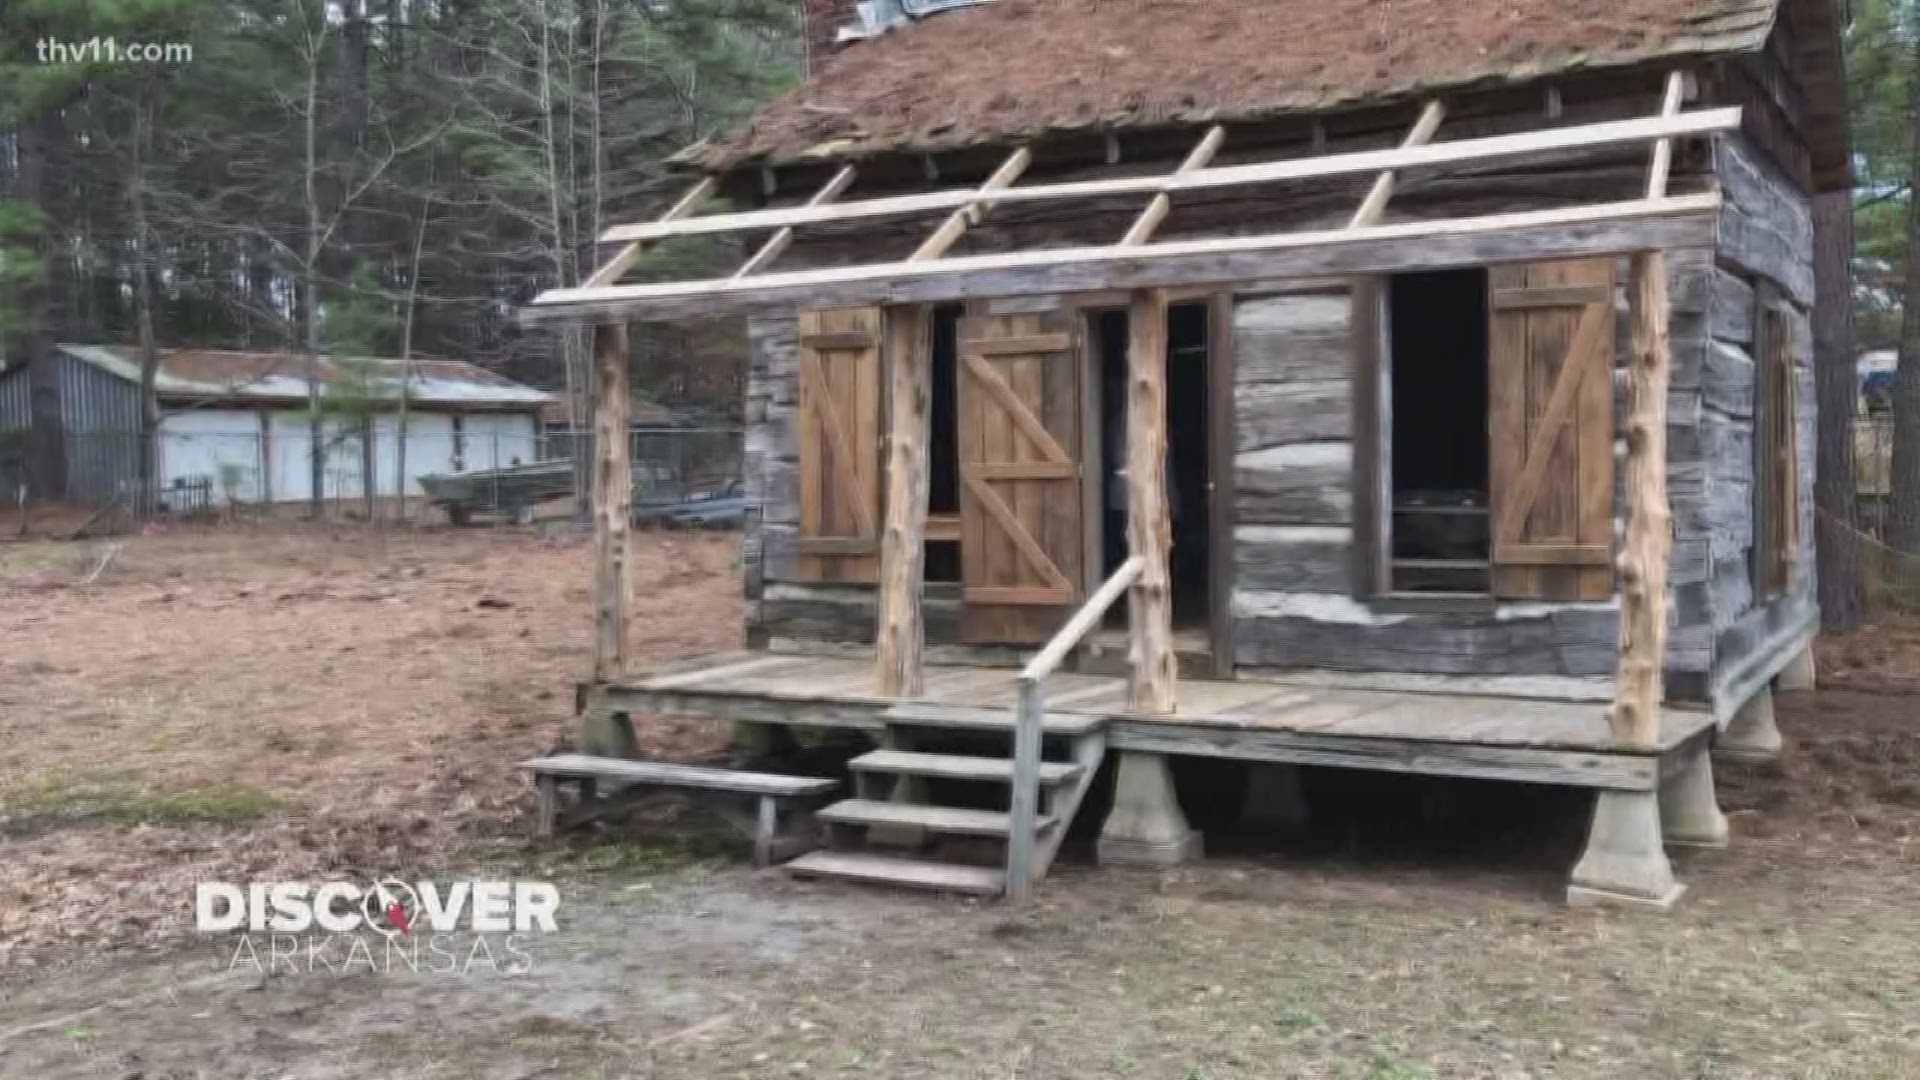 Pioneer Village in Rison has moved six historic buildings to one location.